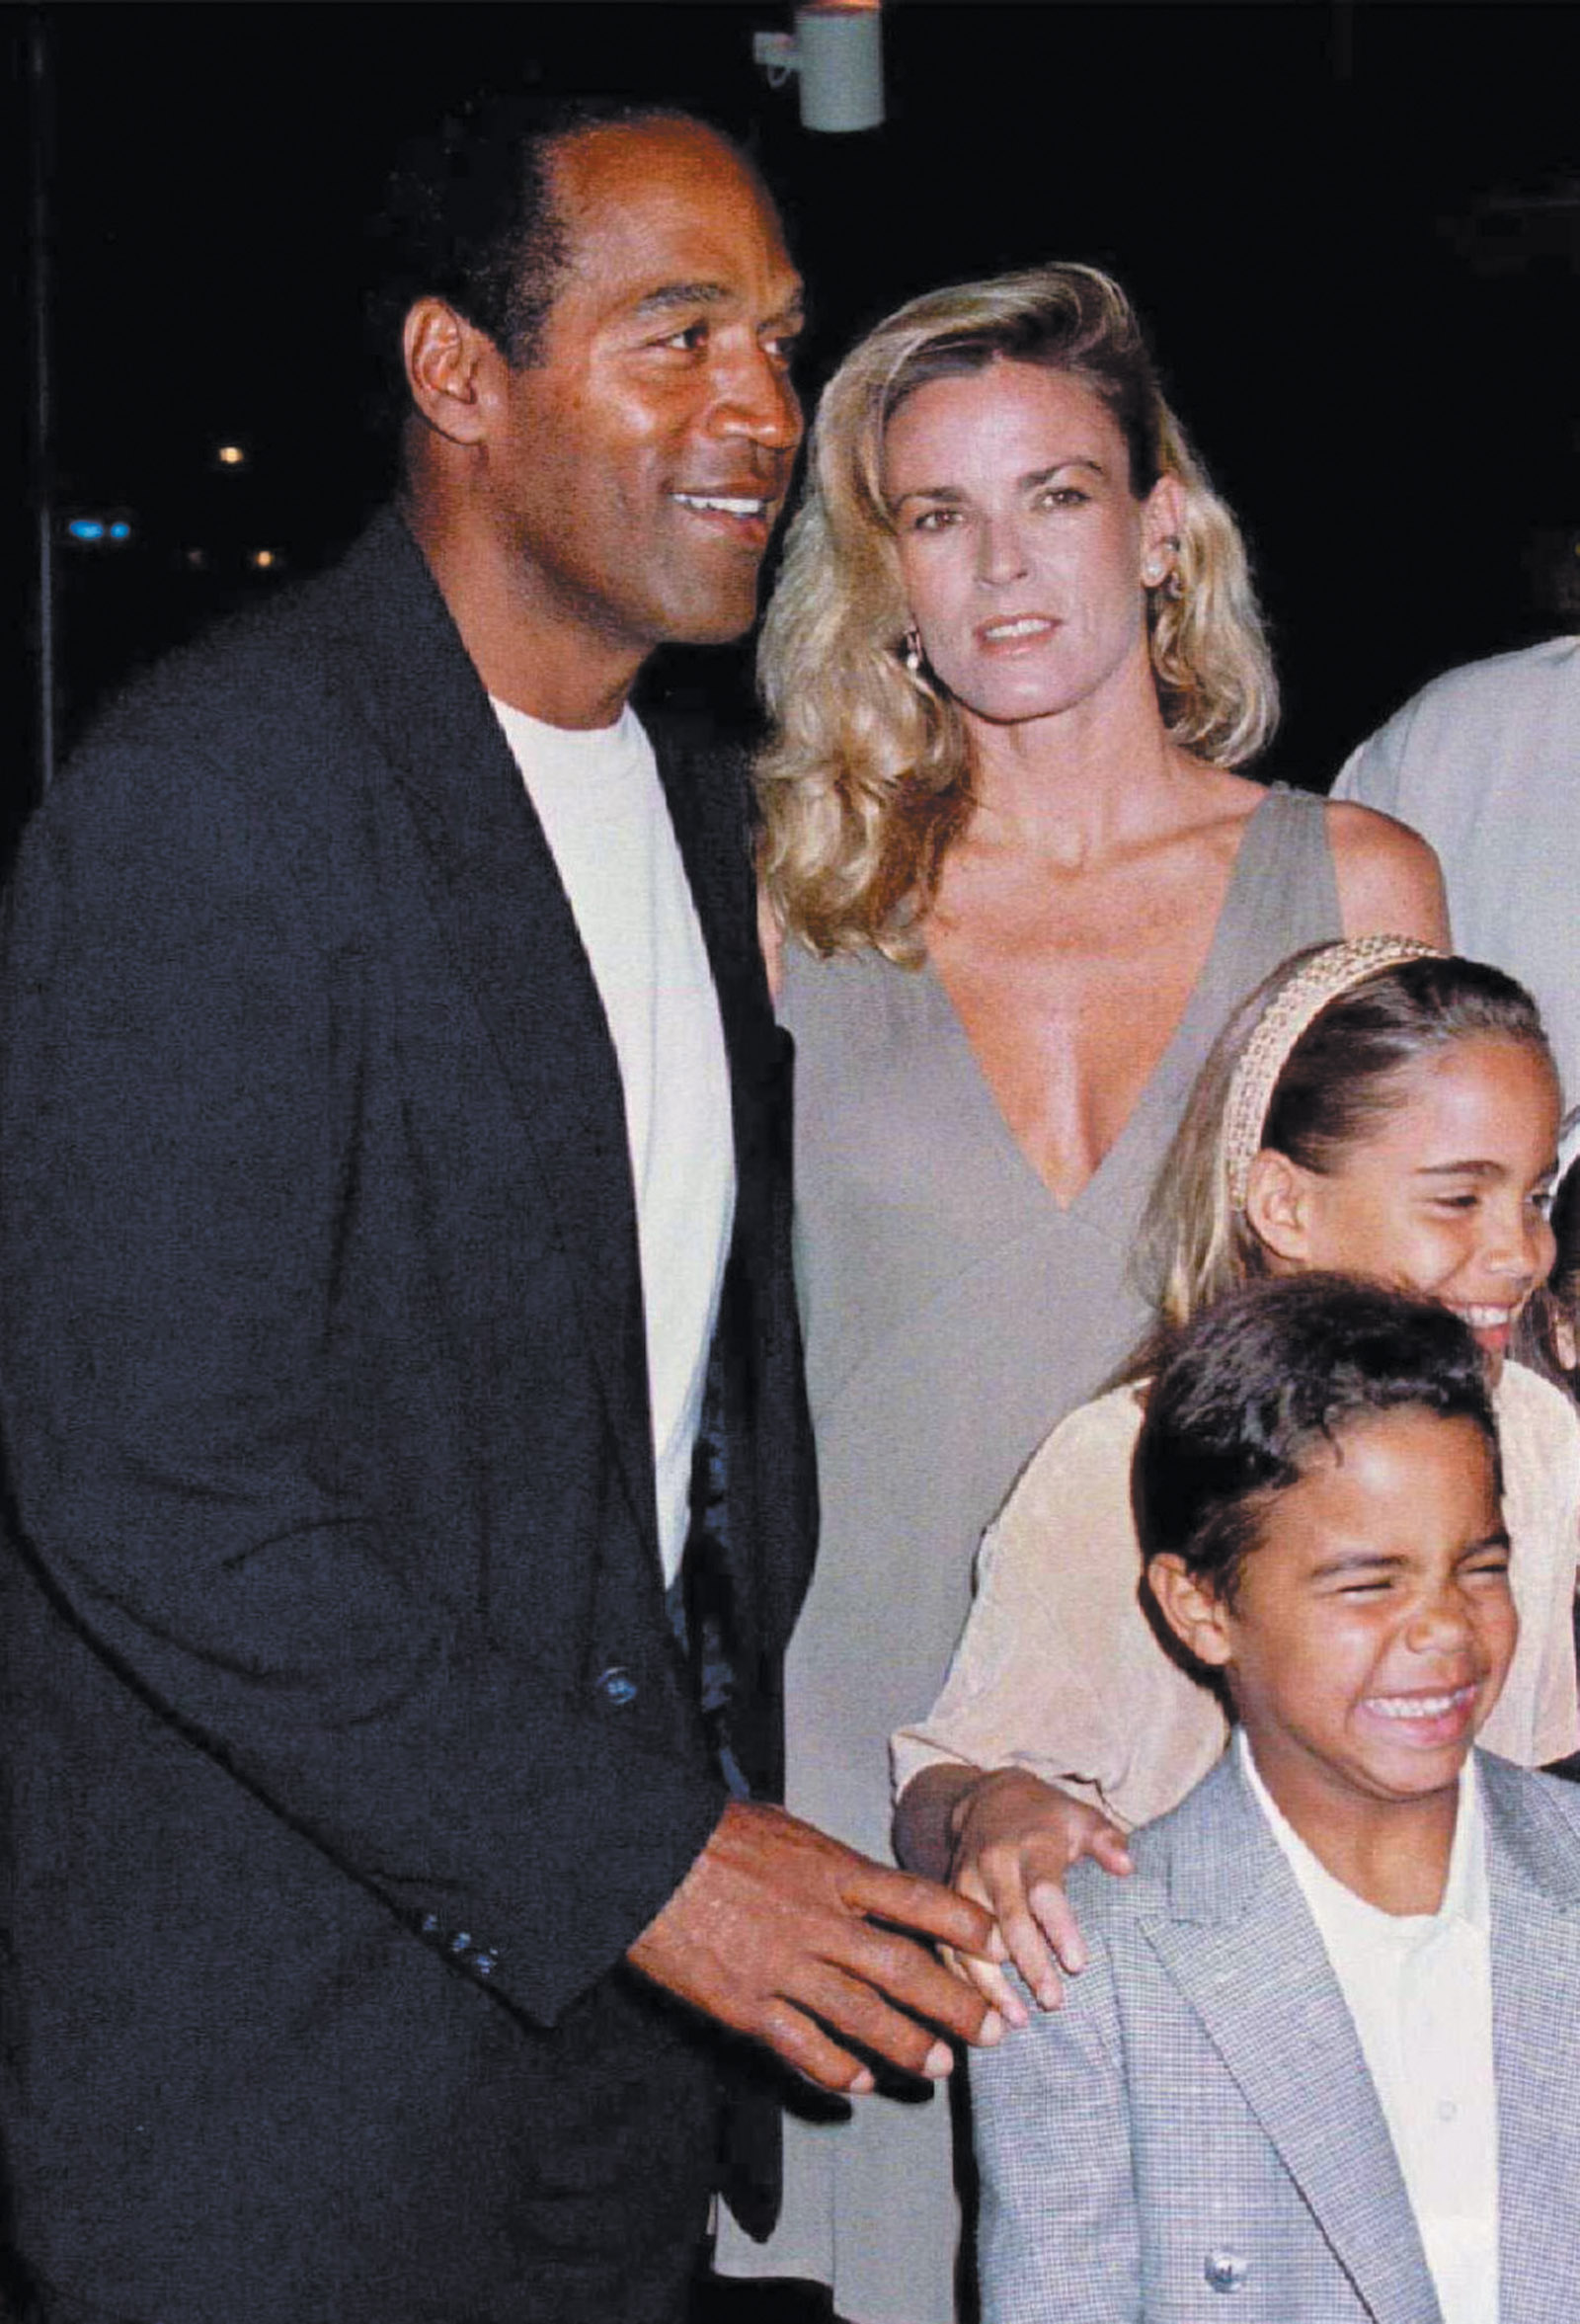 O.J. Simpson, his ex-wife Nicole Brown, and their children, Sydney and Justin, at the premiere of Simpson’s film Naked Gun 33 1/3: The Final Insult, Los Angeles, March 1994